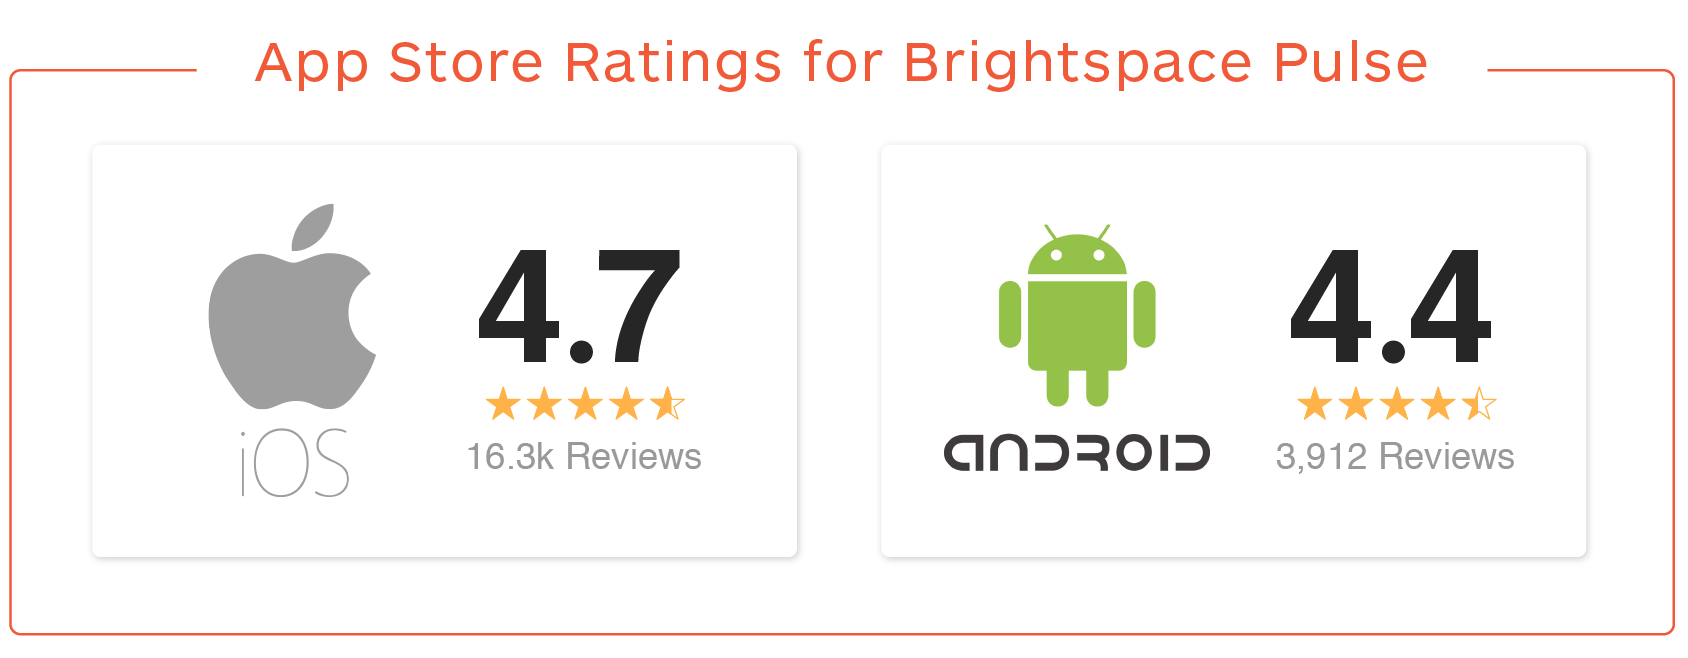 App store ratings for Brightspace Pulse